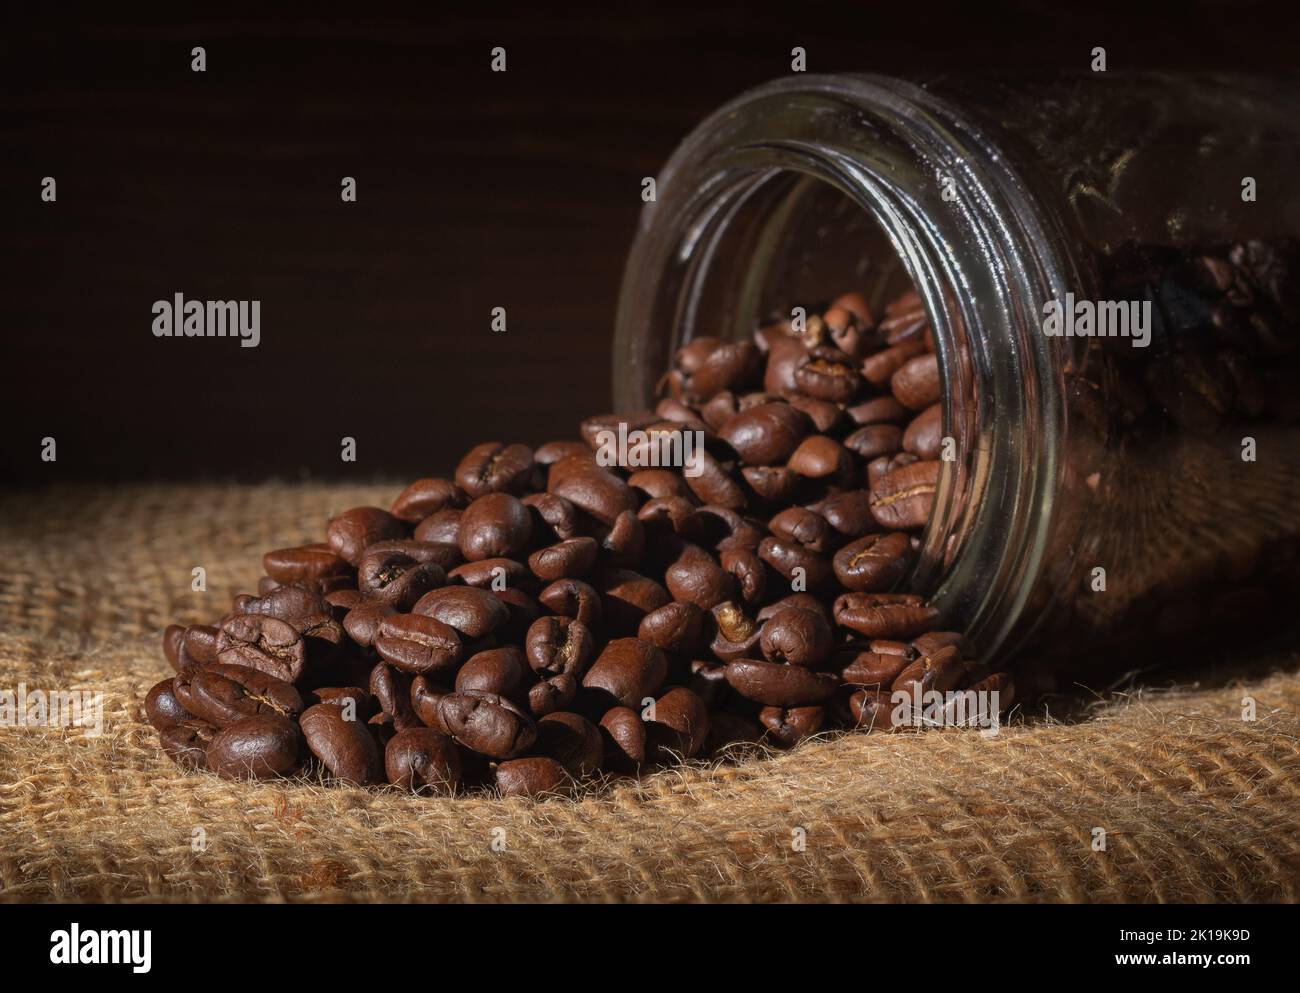 Coffee beans spilled out of mason jar on burlap Stock Photo